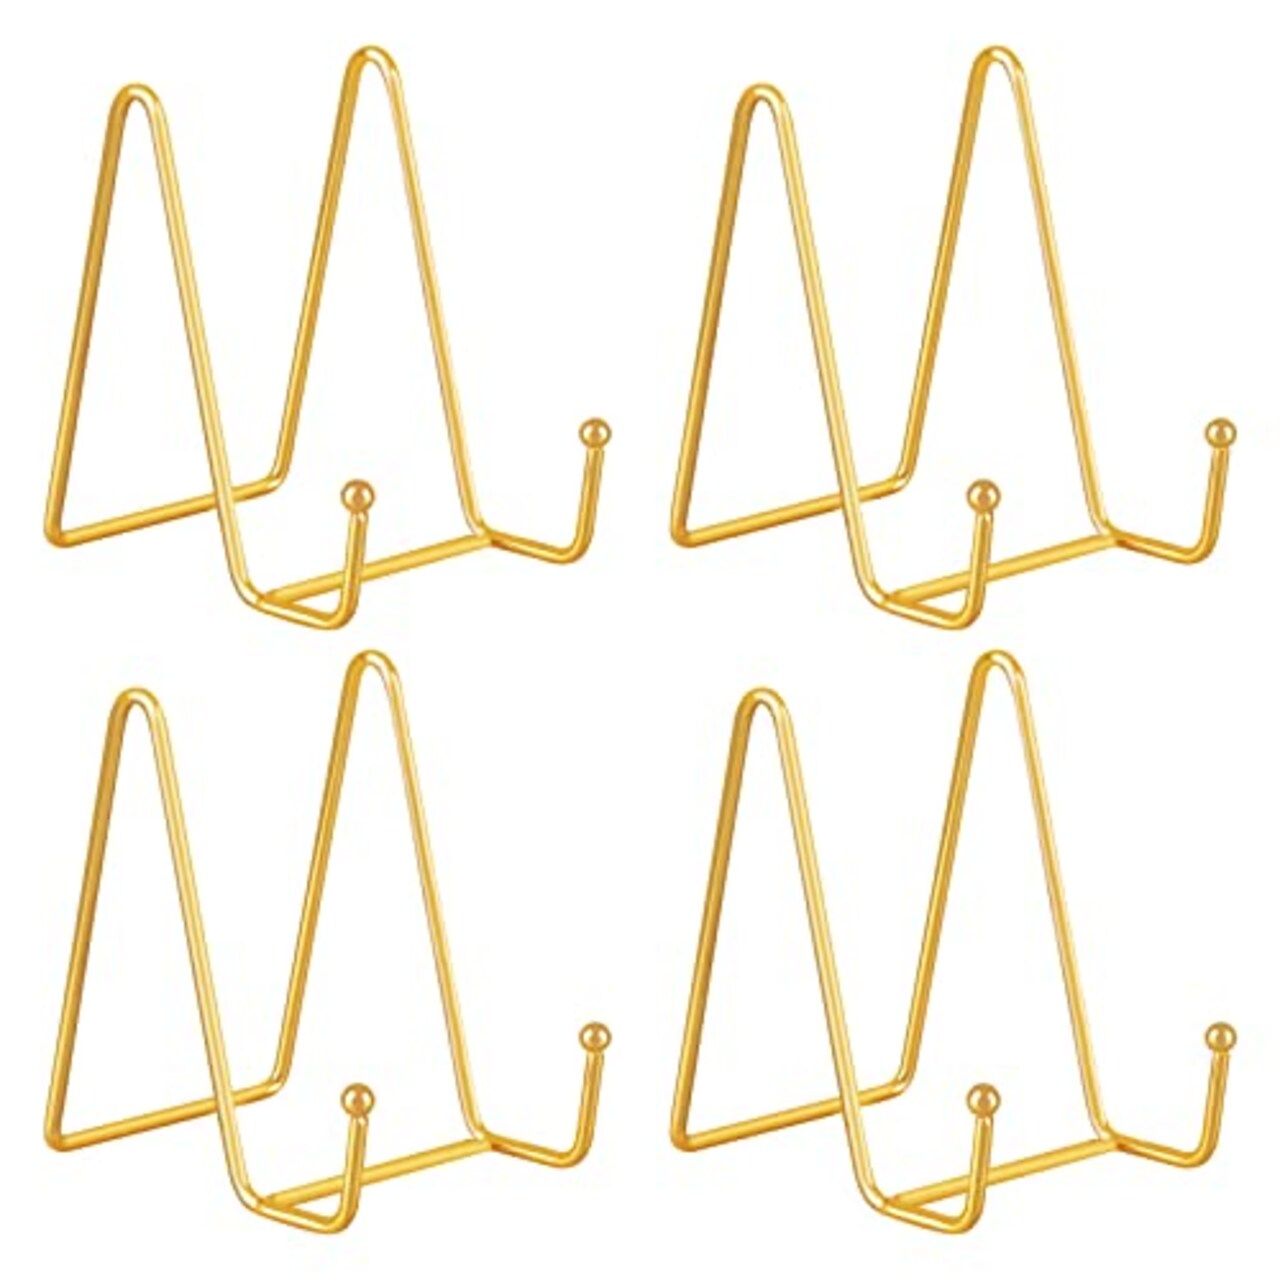 Decolore 4 Pack 4 Inch Display Stands Gold Plate Stands Metal